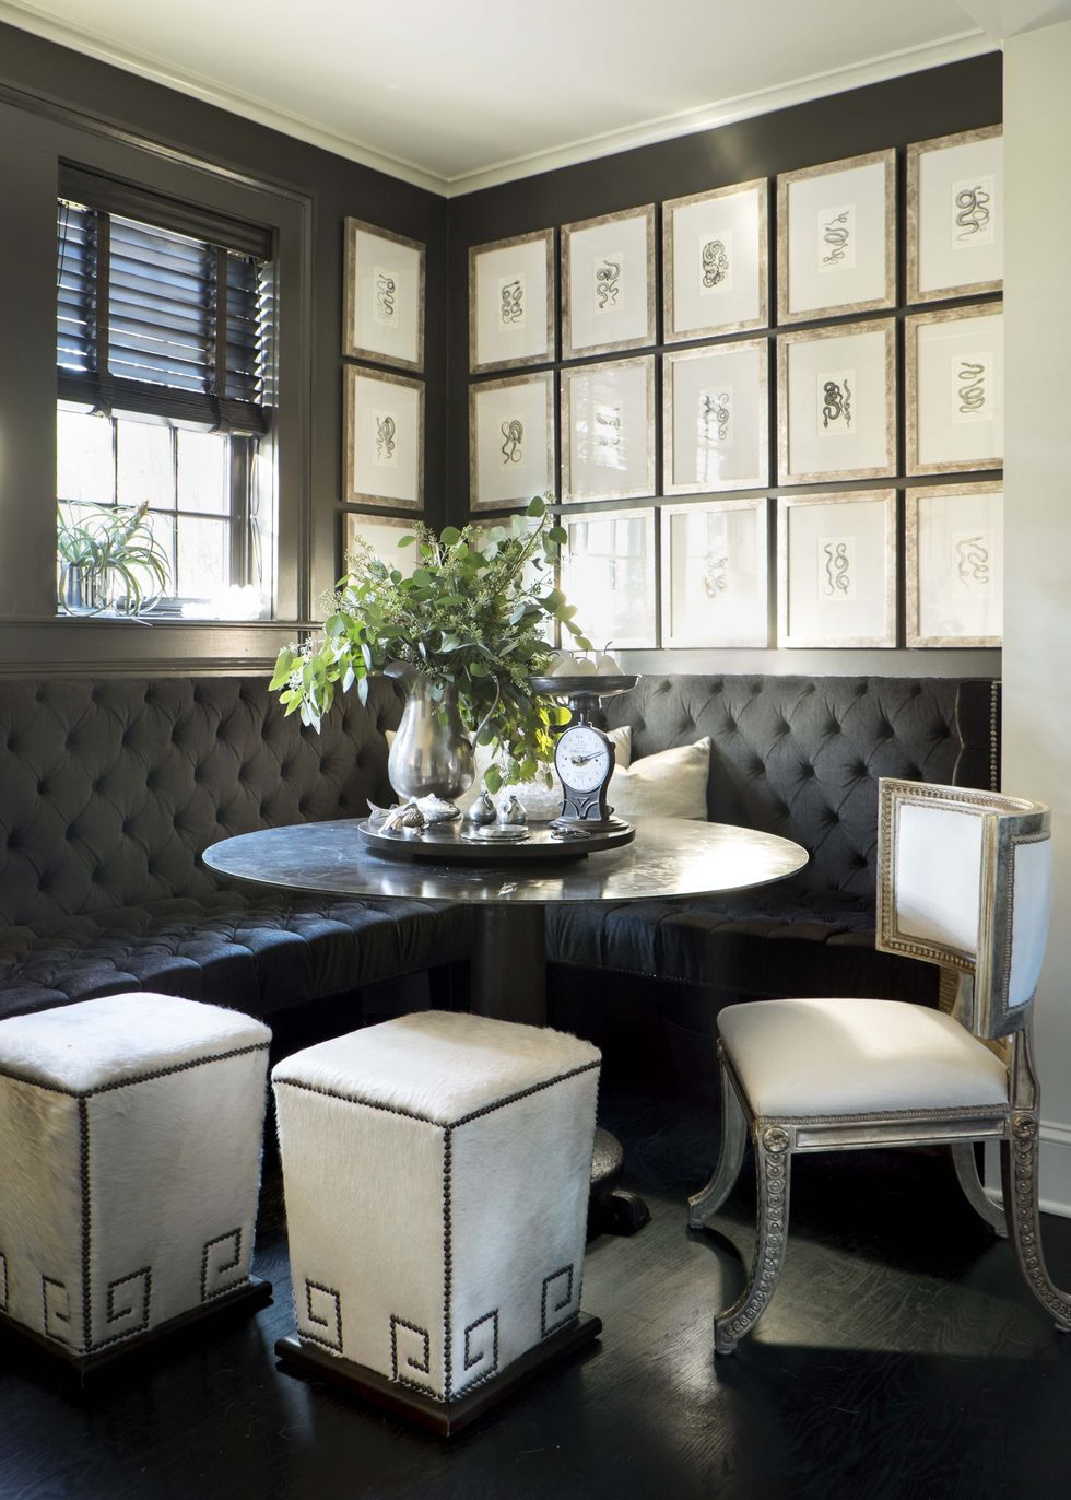 Susan Ferrier design with banquette; photo by Erica George Dines for Veranda magazine. #banquettes #breakfastnook